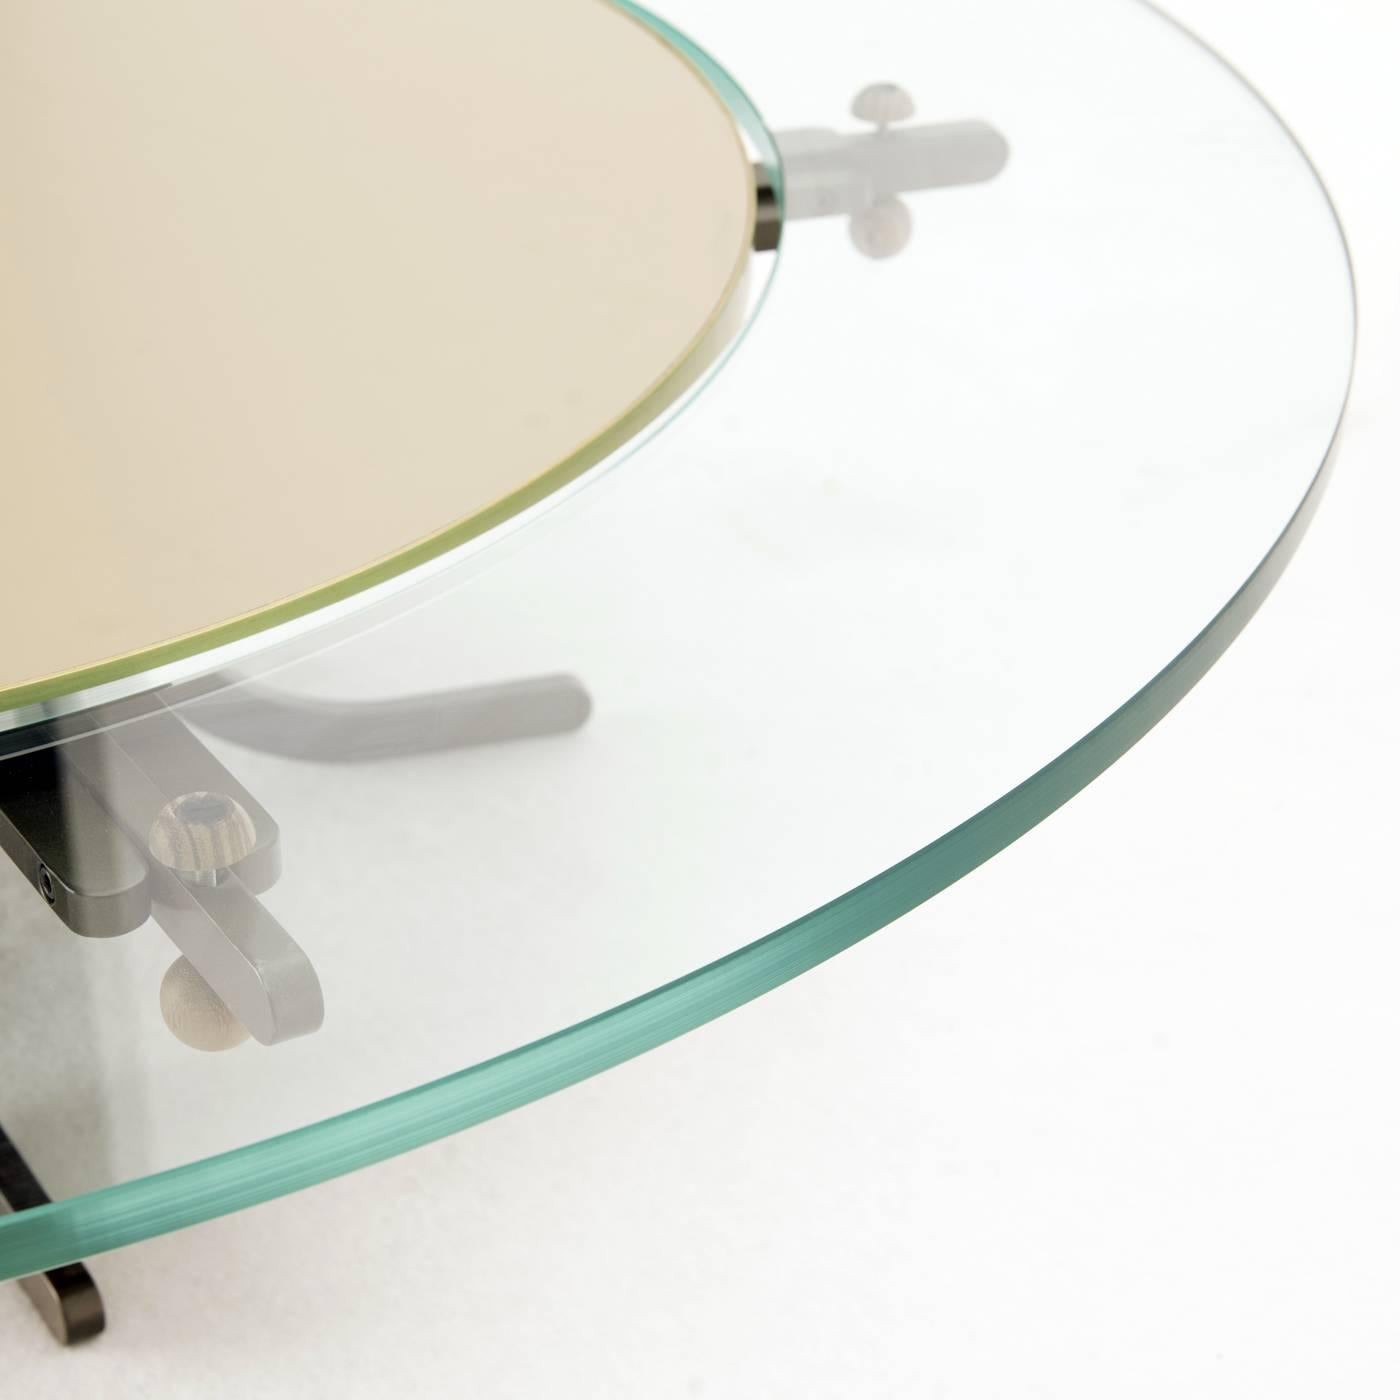 This unique coffee table features a top made of two disks: The glass edge is fixed, the central disk, hand-upholstered in leather, rotates to share and serve food. This striking top rests on an iron structure with visible brass details.